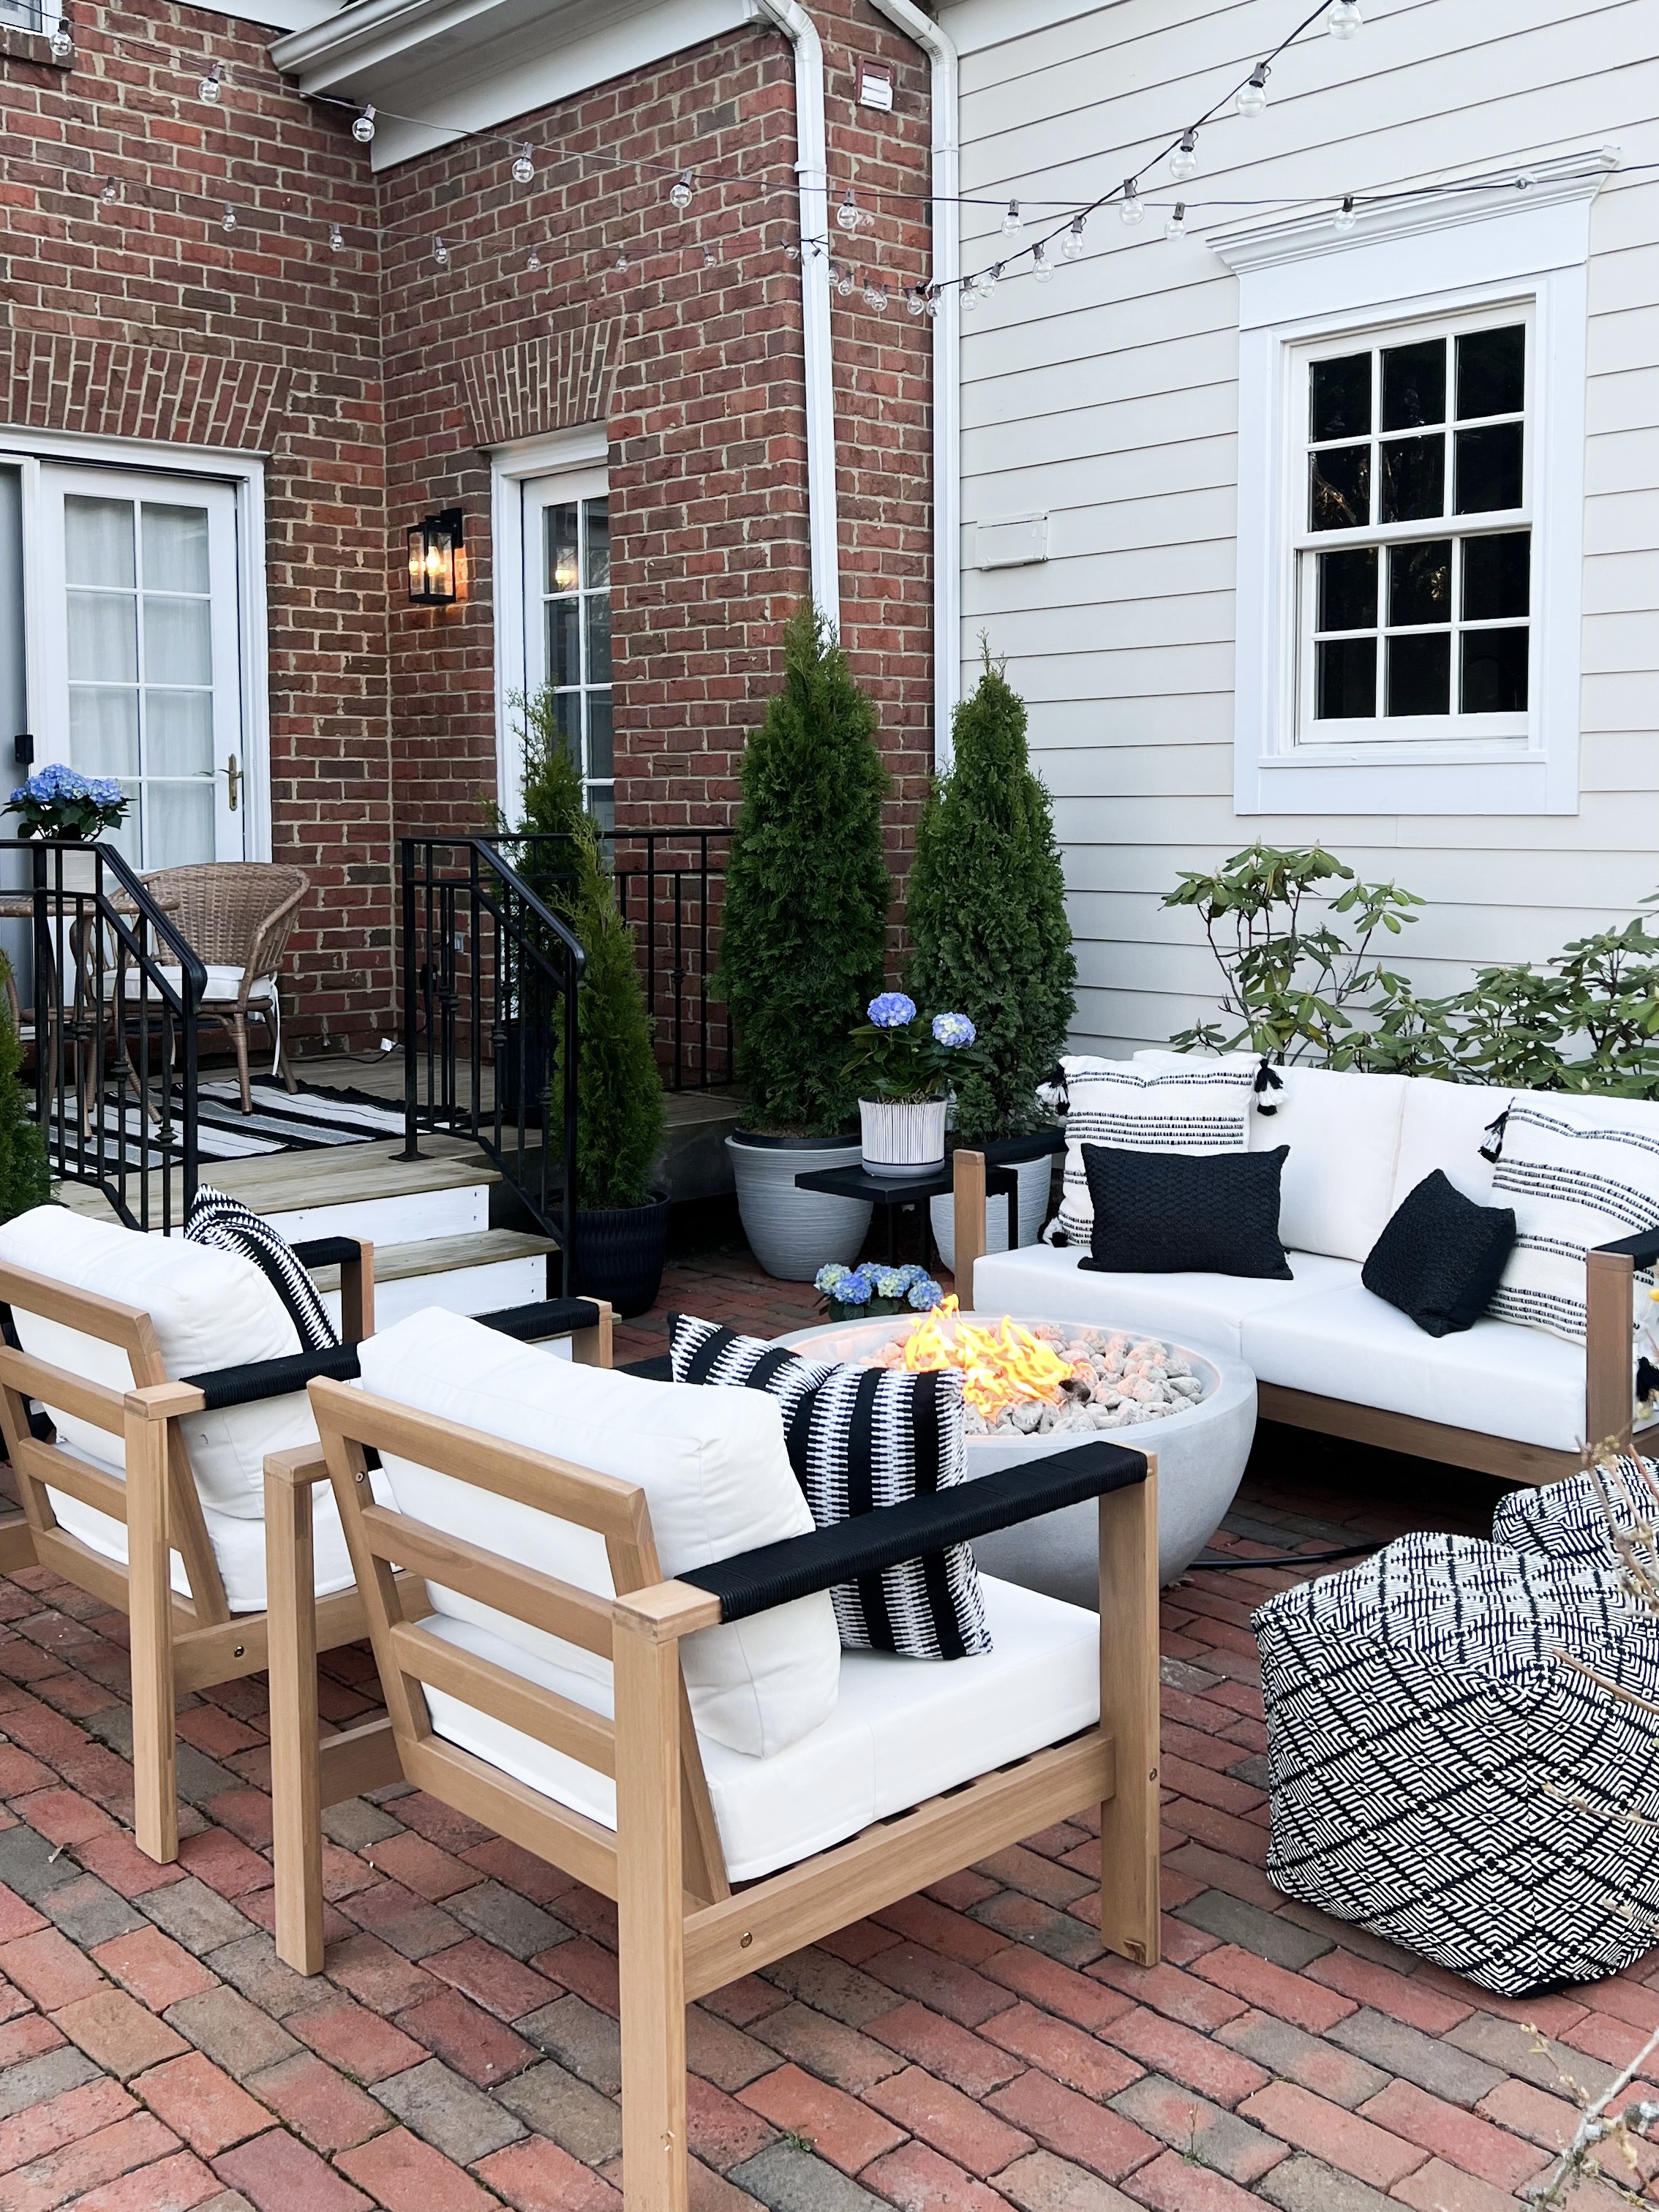 Patio Makeover Before and After: The After